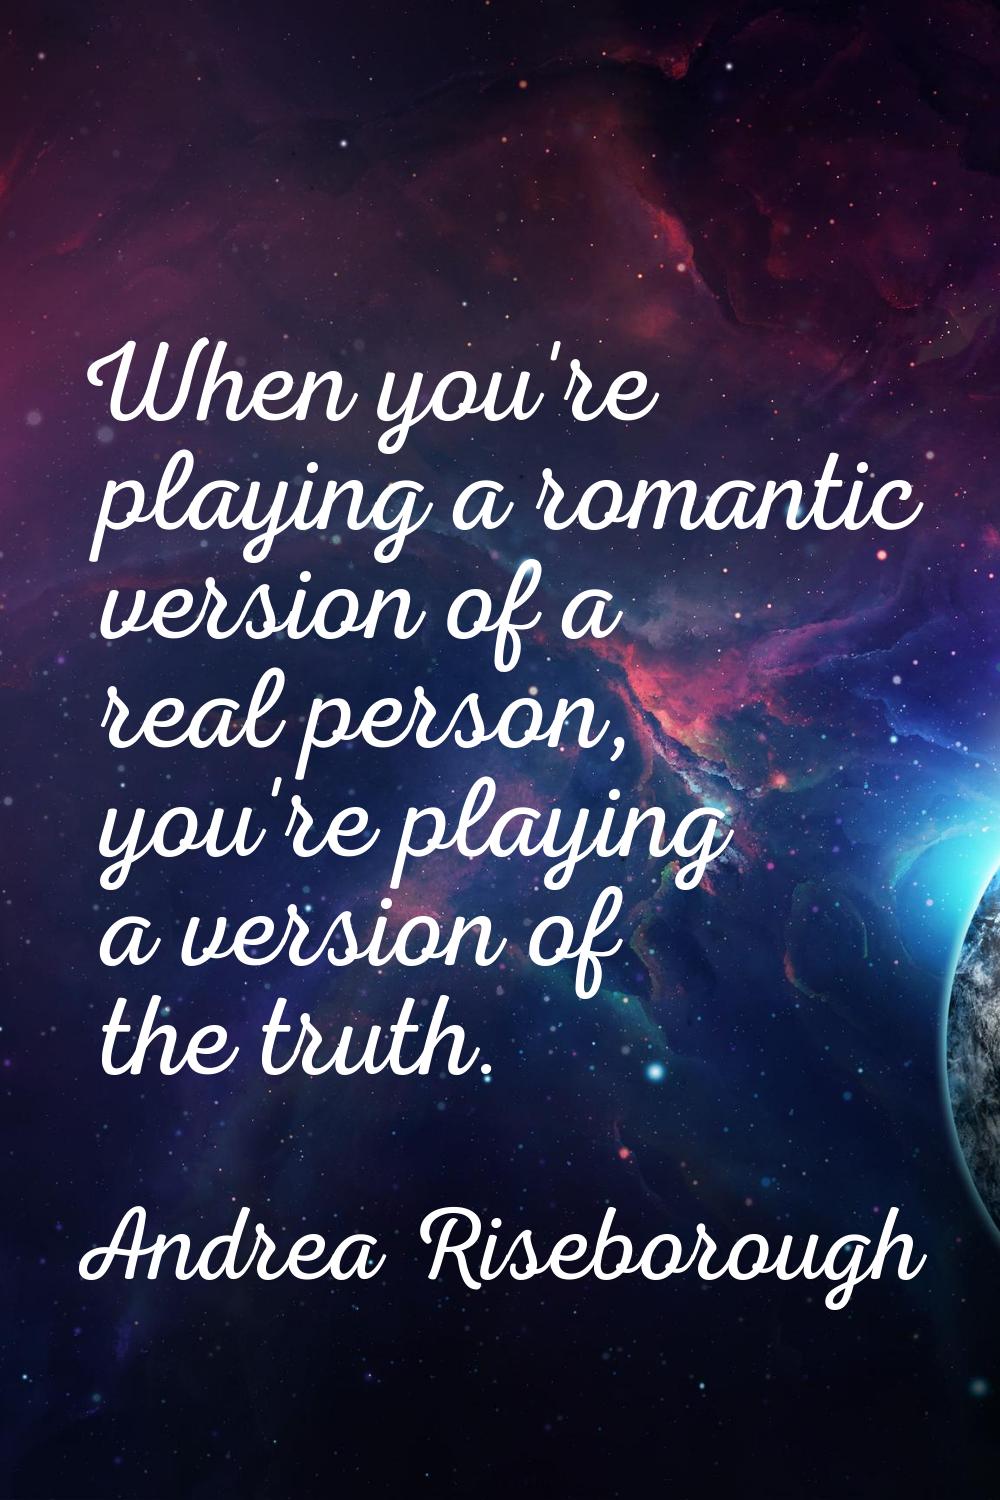 When you're playing a romantic version of a real person, you're playing a version of the truth.